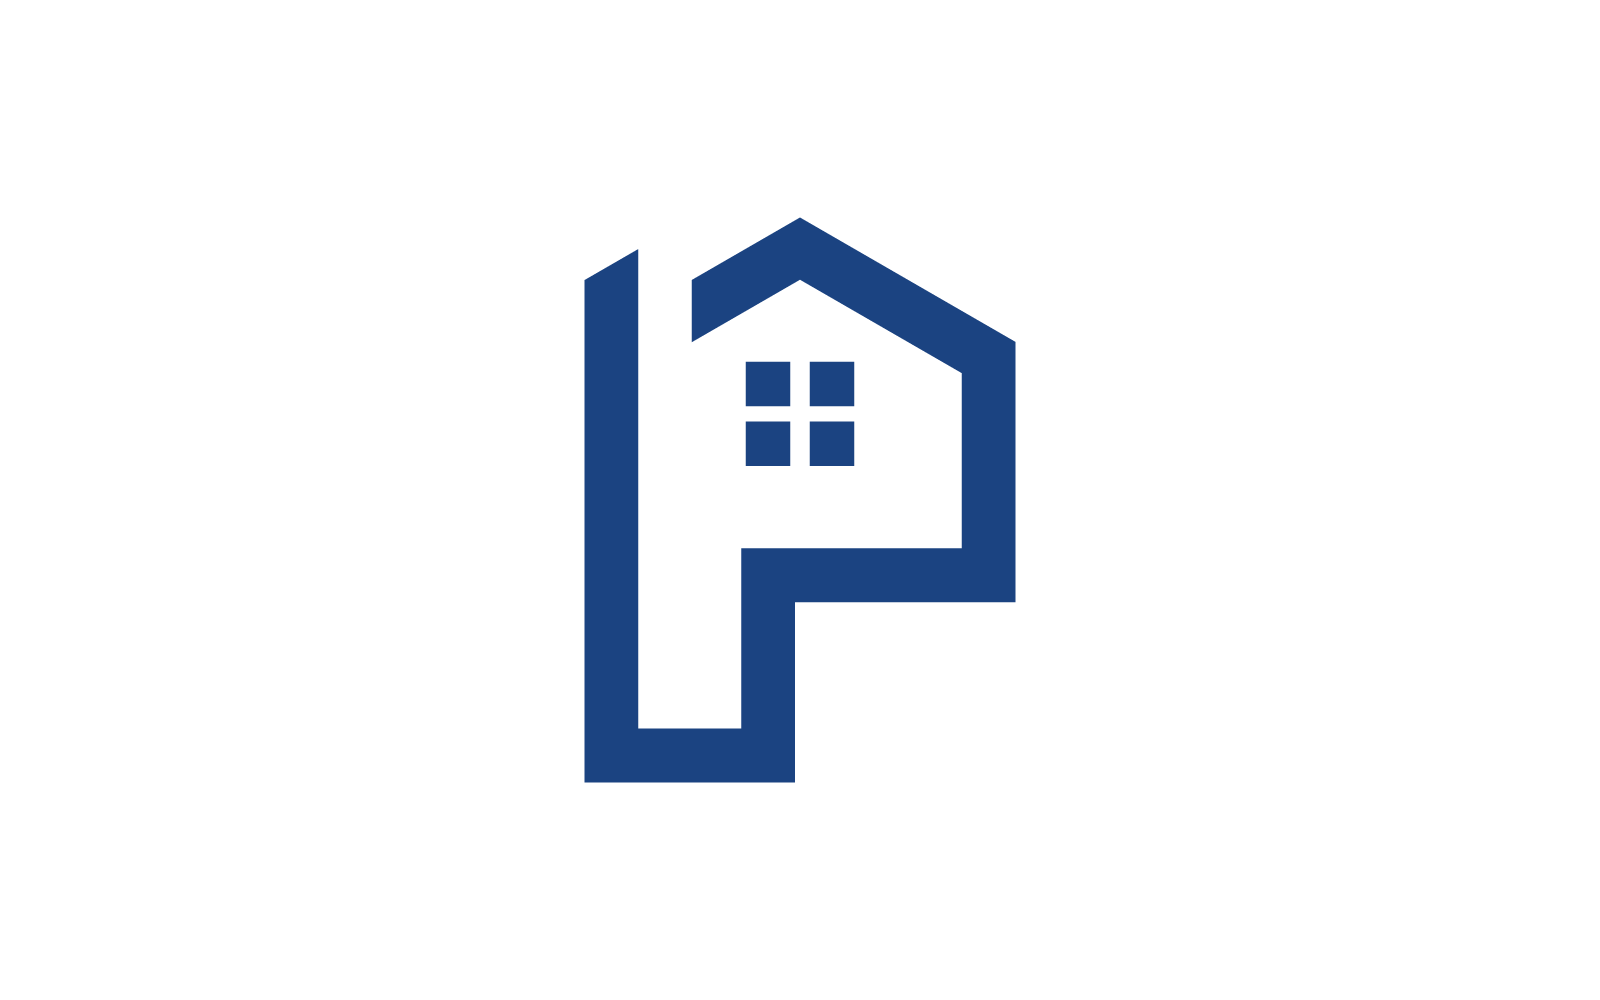 P initial Home Property and construction logo design Logo Template